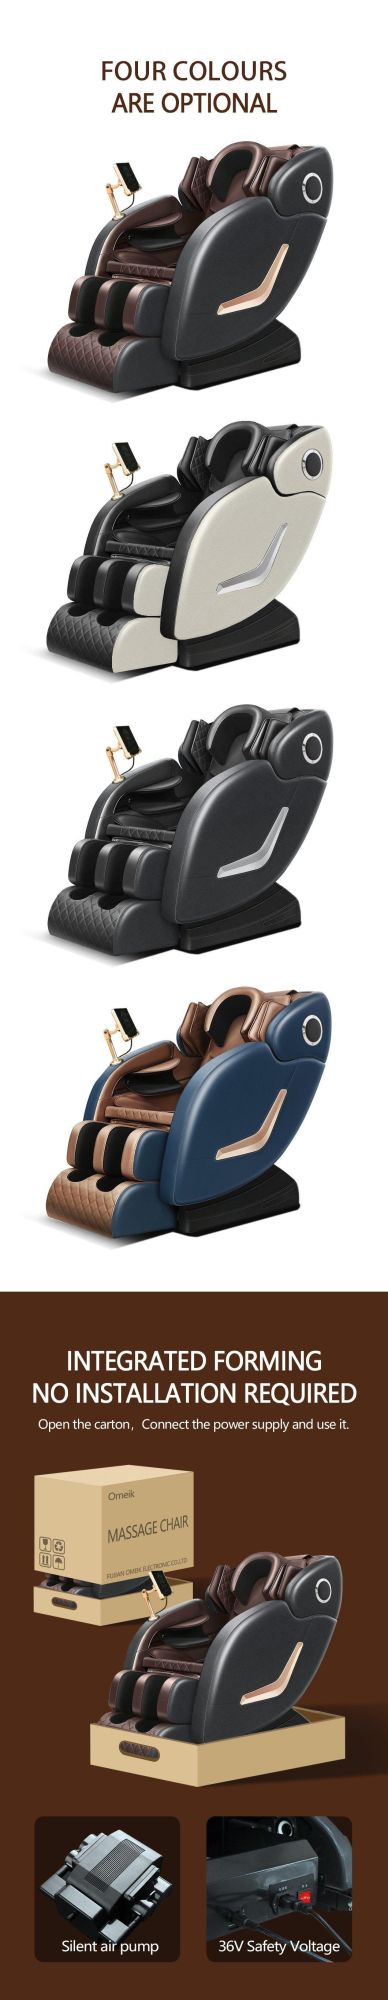 Cheap Space Capsule New Zero Gravity Waist Heating Commercial Full Body Portable Massage Chair